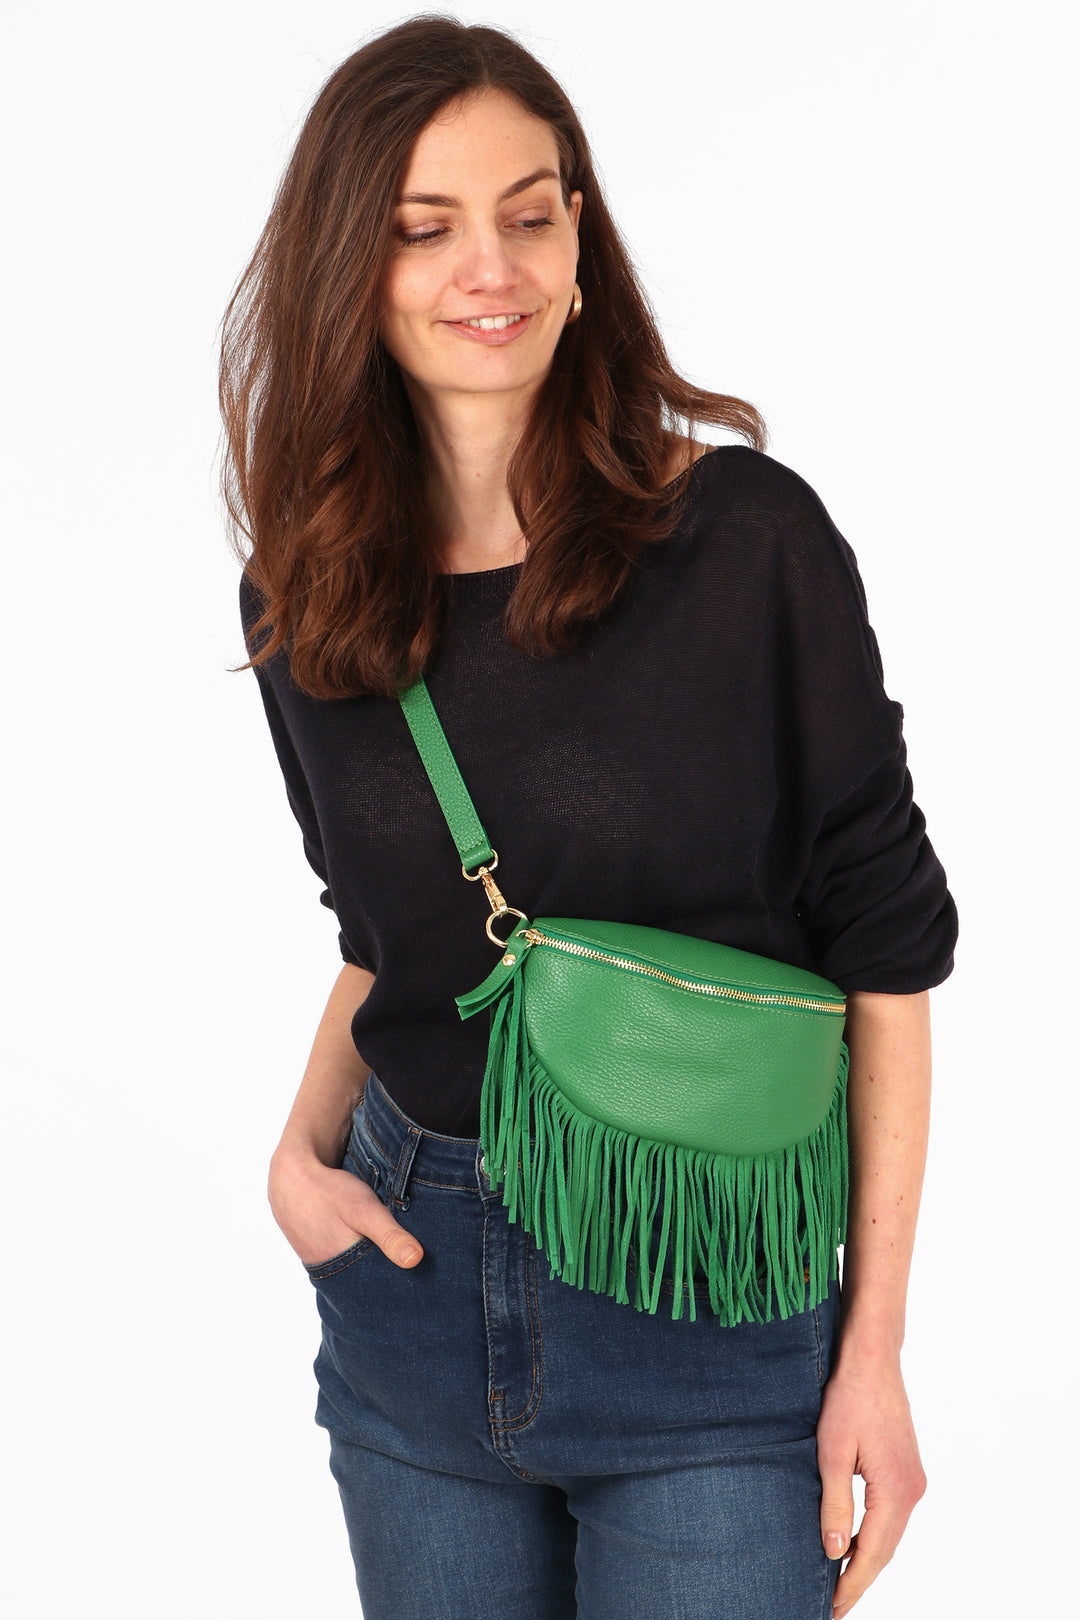 model wearing a bright green half moon cross body leather bag with a fringed trim and gold zip closure